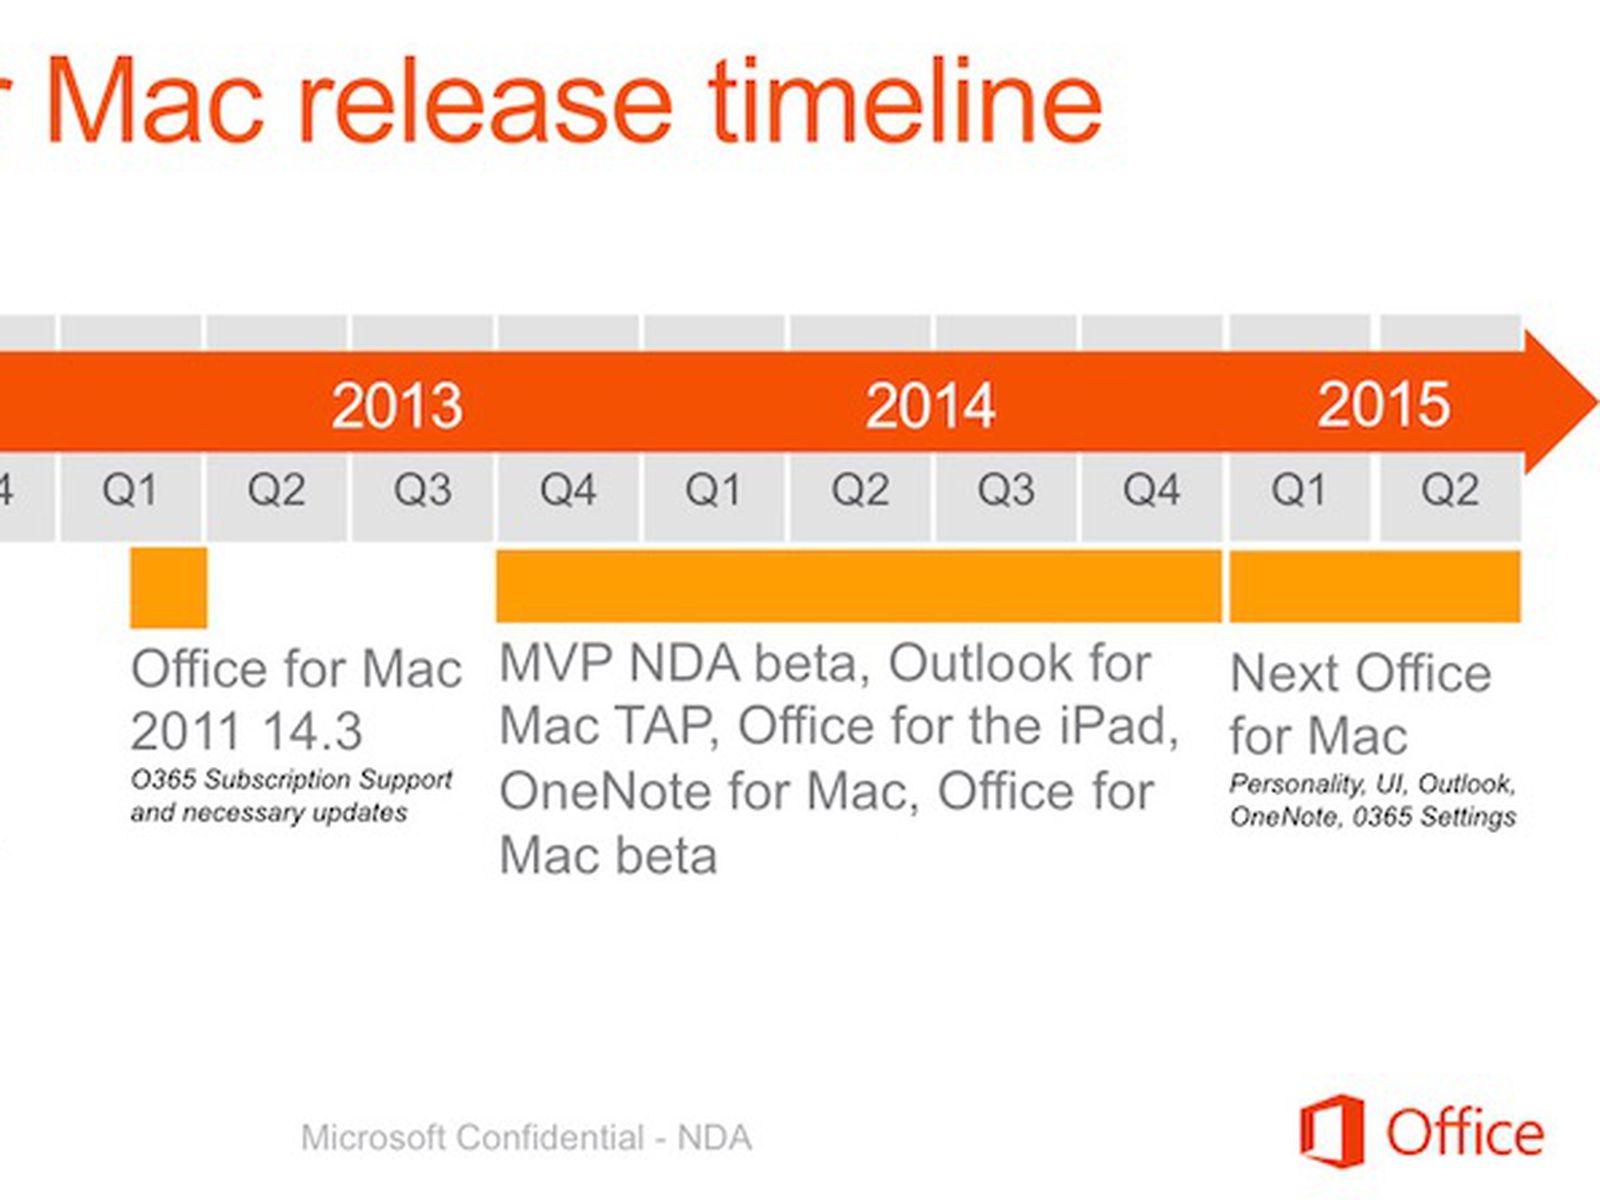 microsoft office timeline of releases